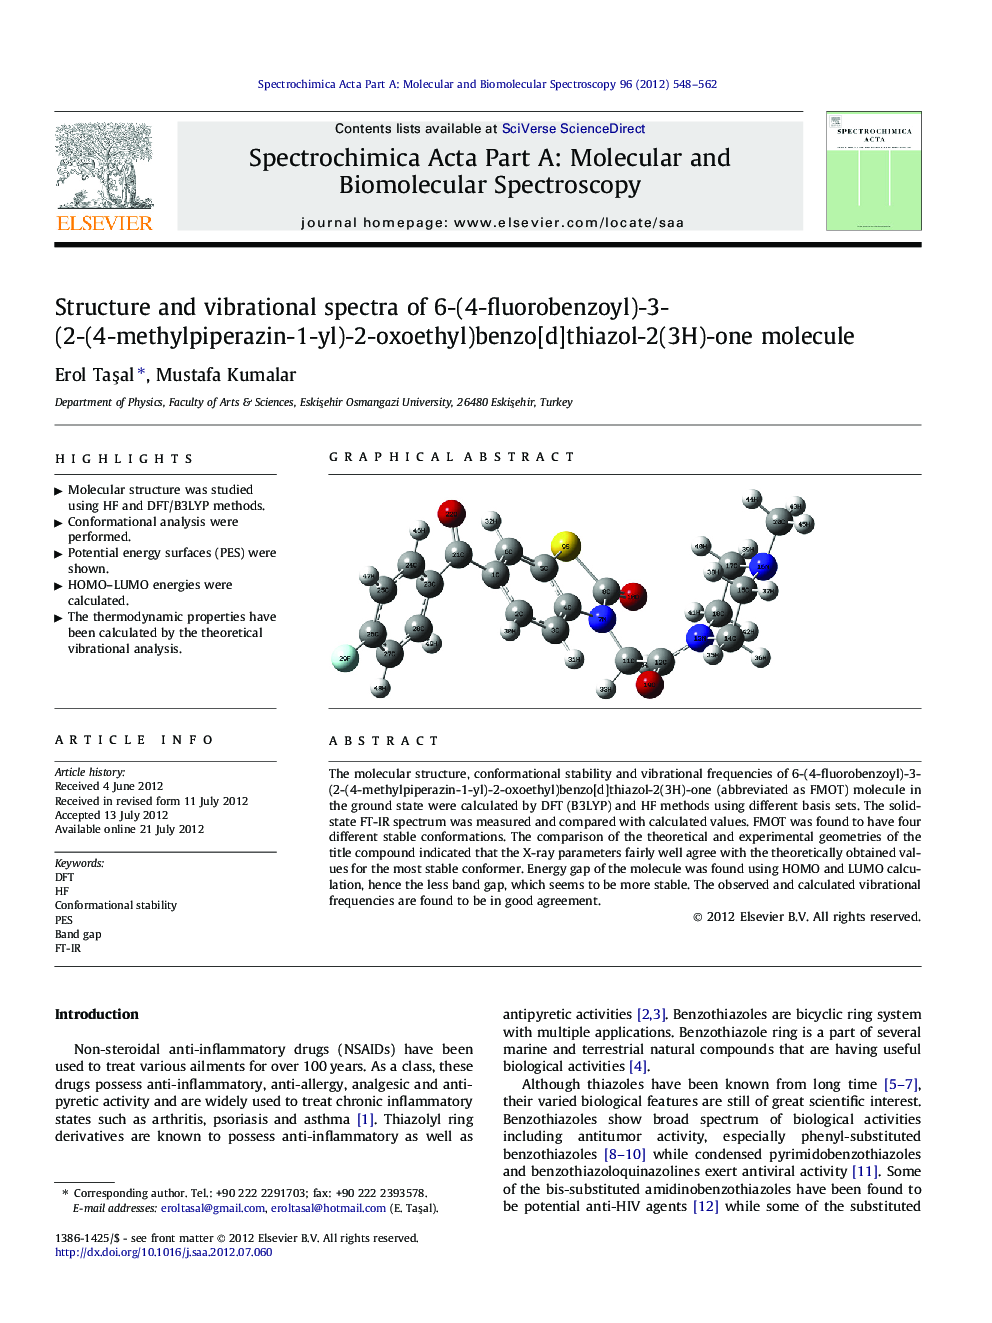 Structure and vibrational spectra of 6-(4-fluorobenzoyl)-3-(2-(4-methylpiperazin-1-yl)-2-oxoethyl)benzo[d]thiazol-2(3H)-one molecule